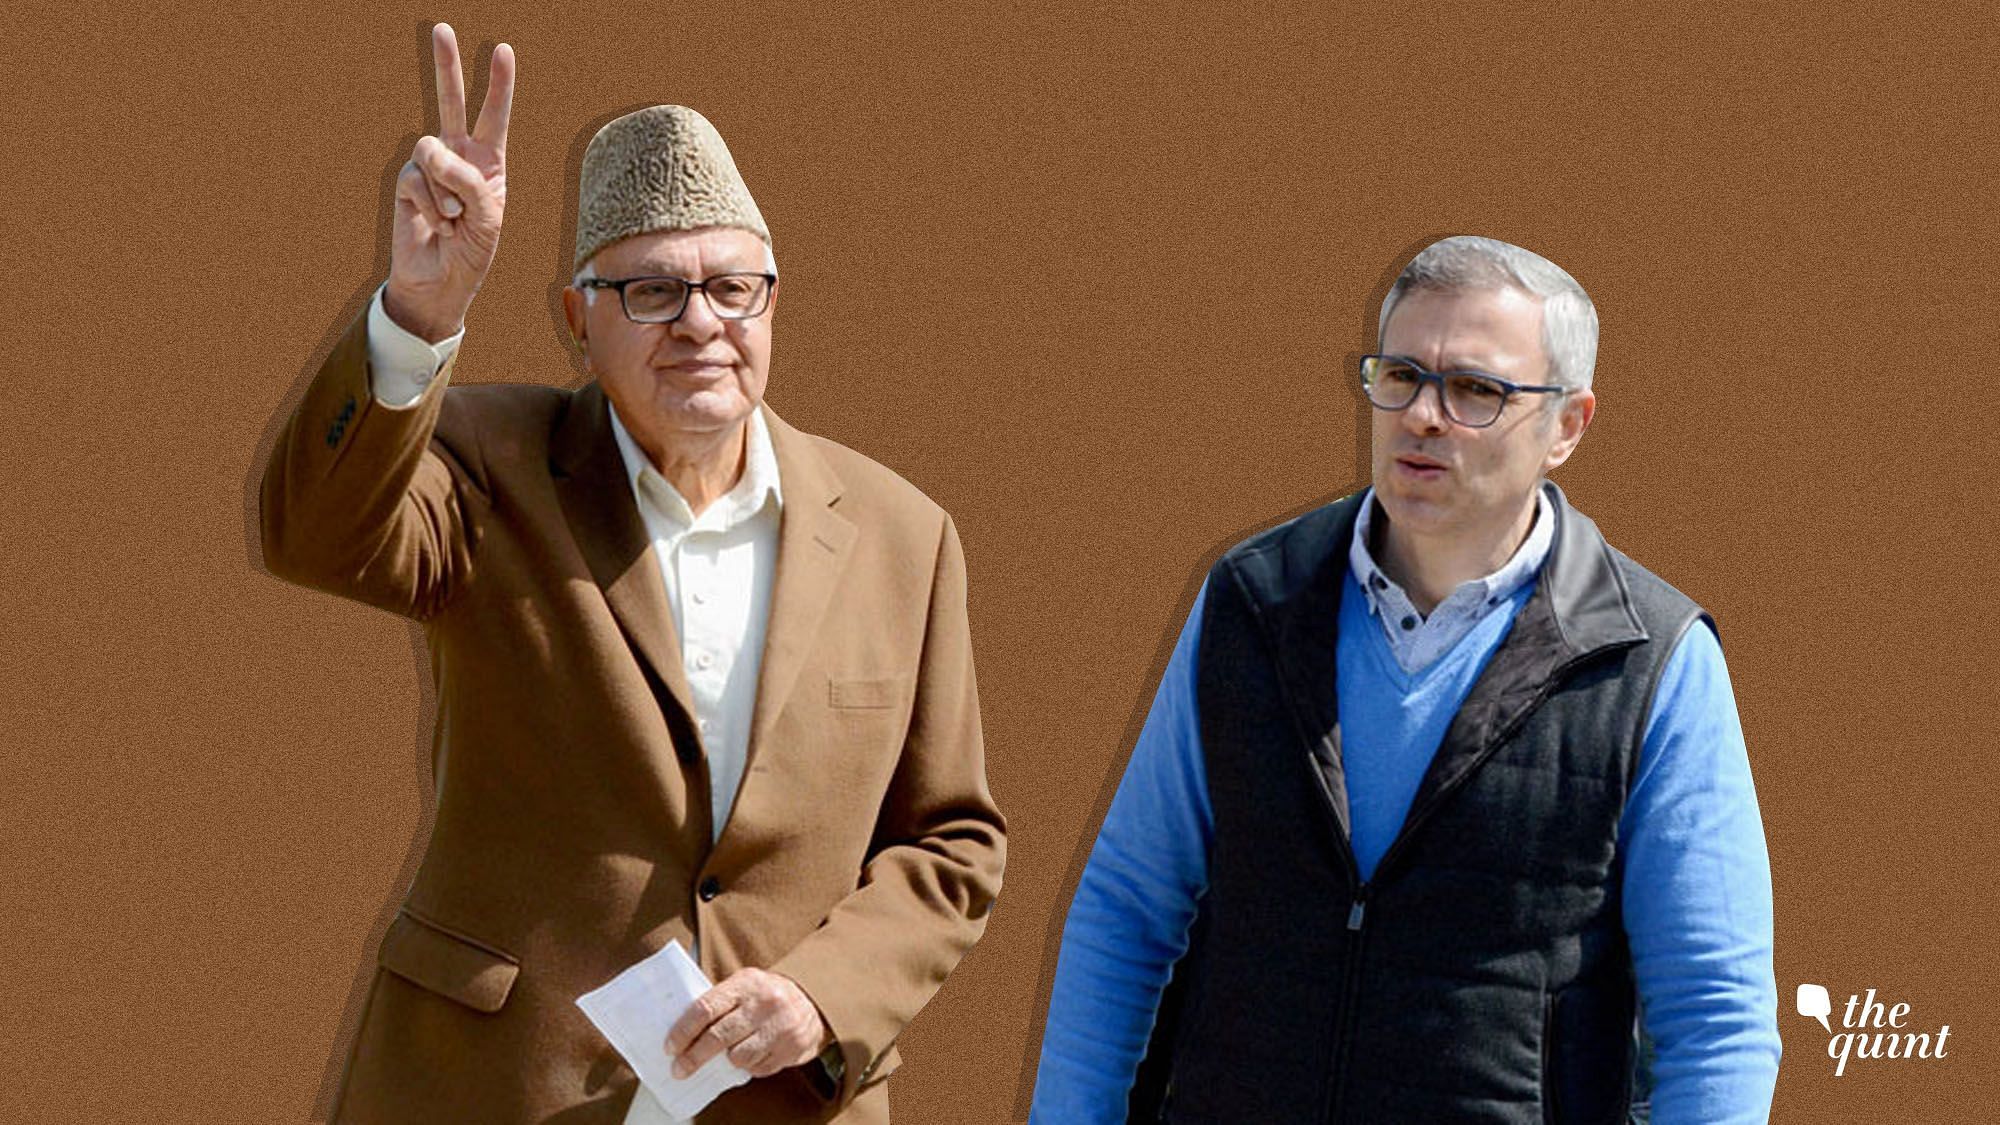 Two MPs from the National Conference Party have been allowed to meet Dr Farooq Abdullah and Mr Omar Abdullah, President and Vice President of their party, respectively.